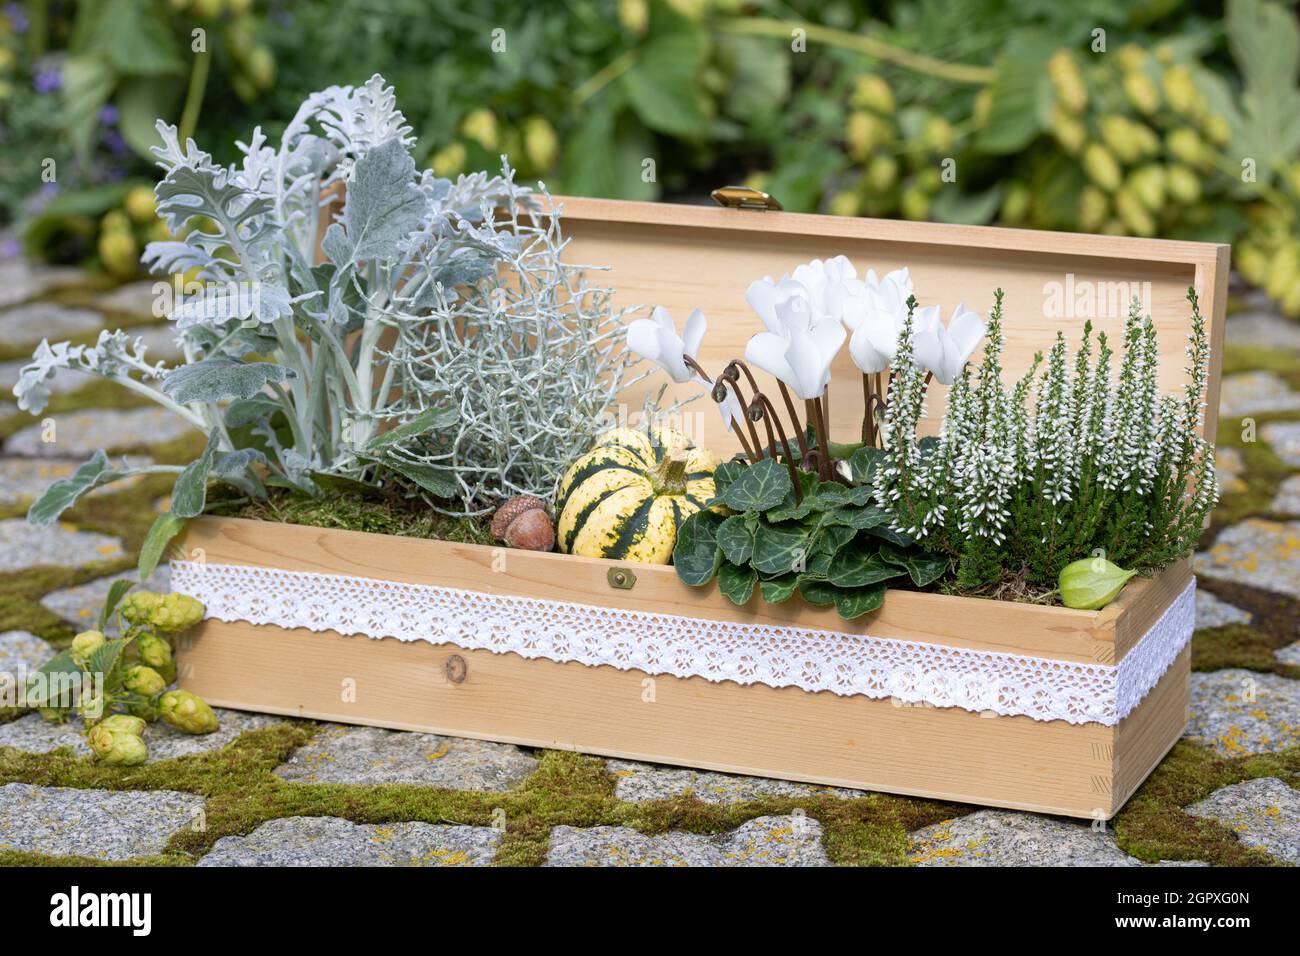 wooden box with white caclamen, heather flower, cushion bush and silver wort as floral decoration Stock Photo